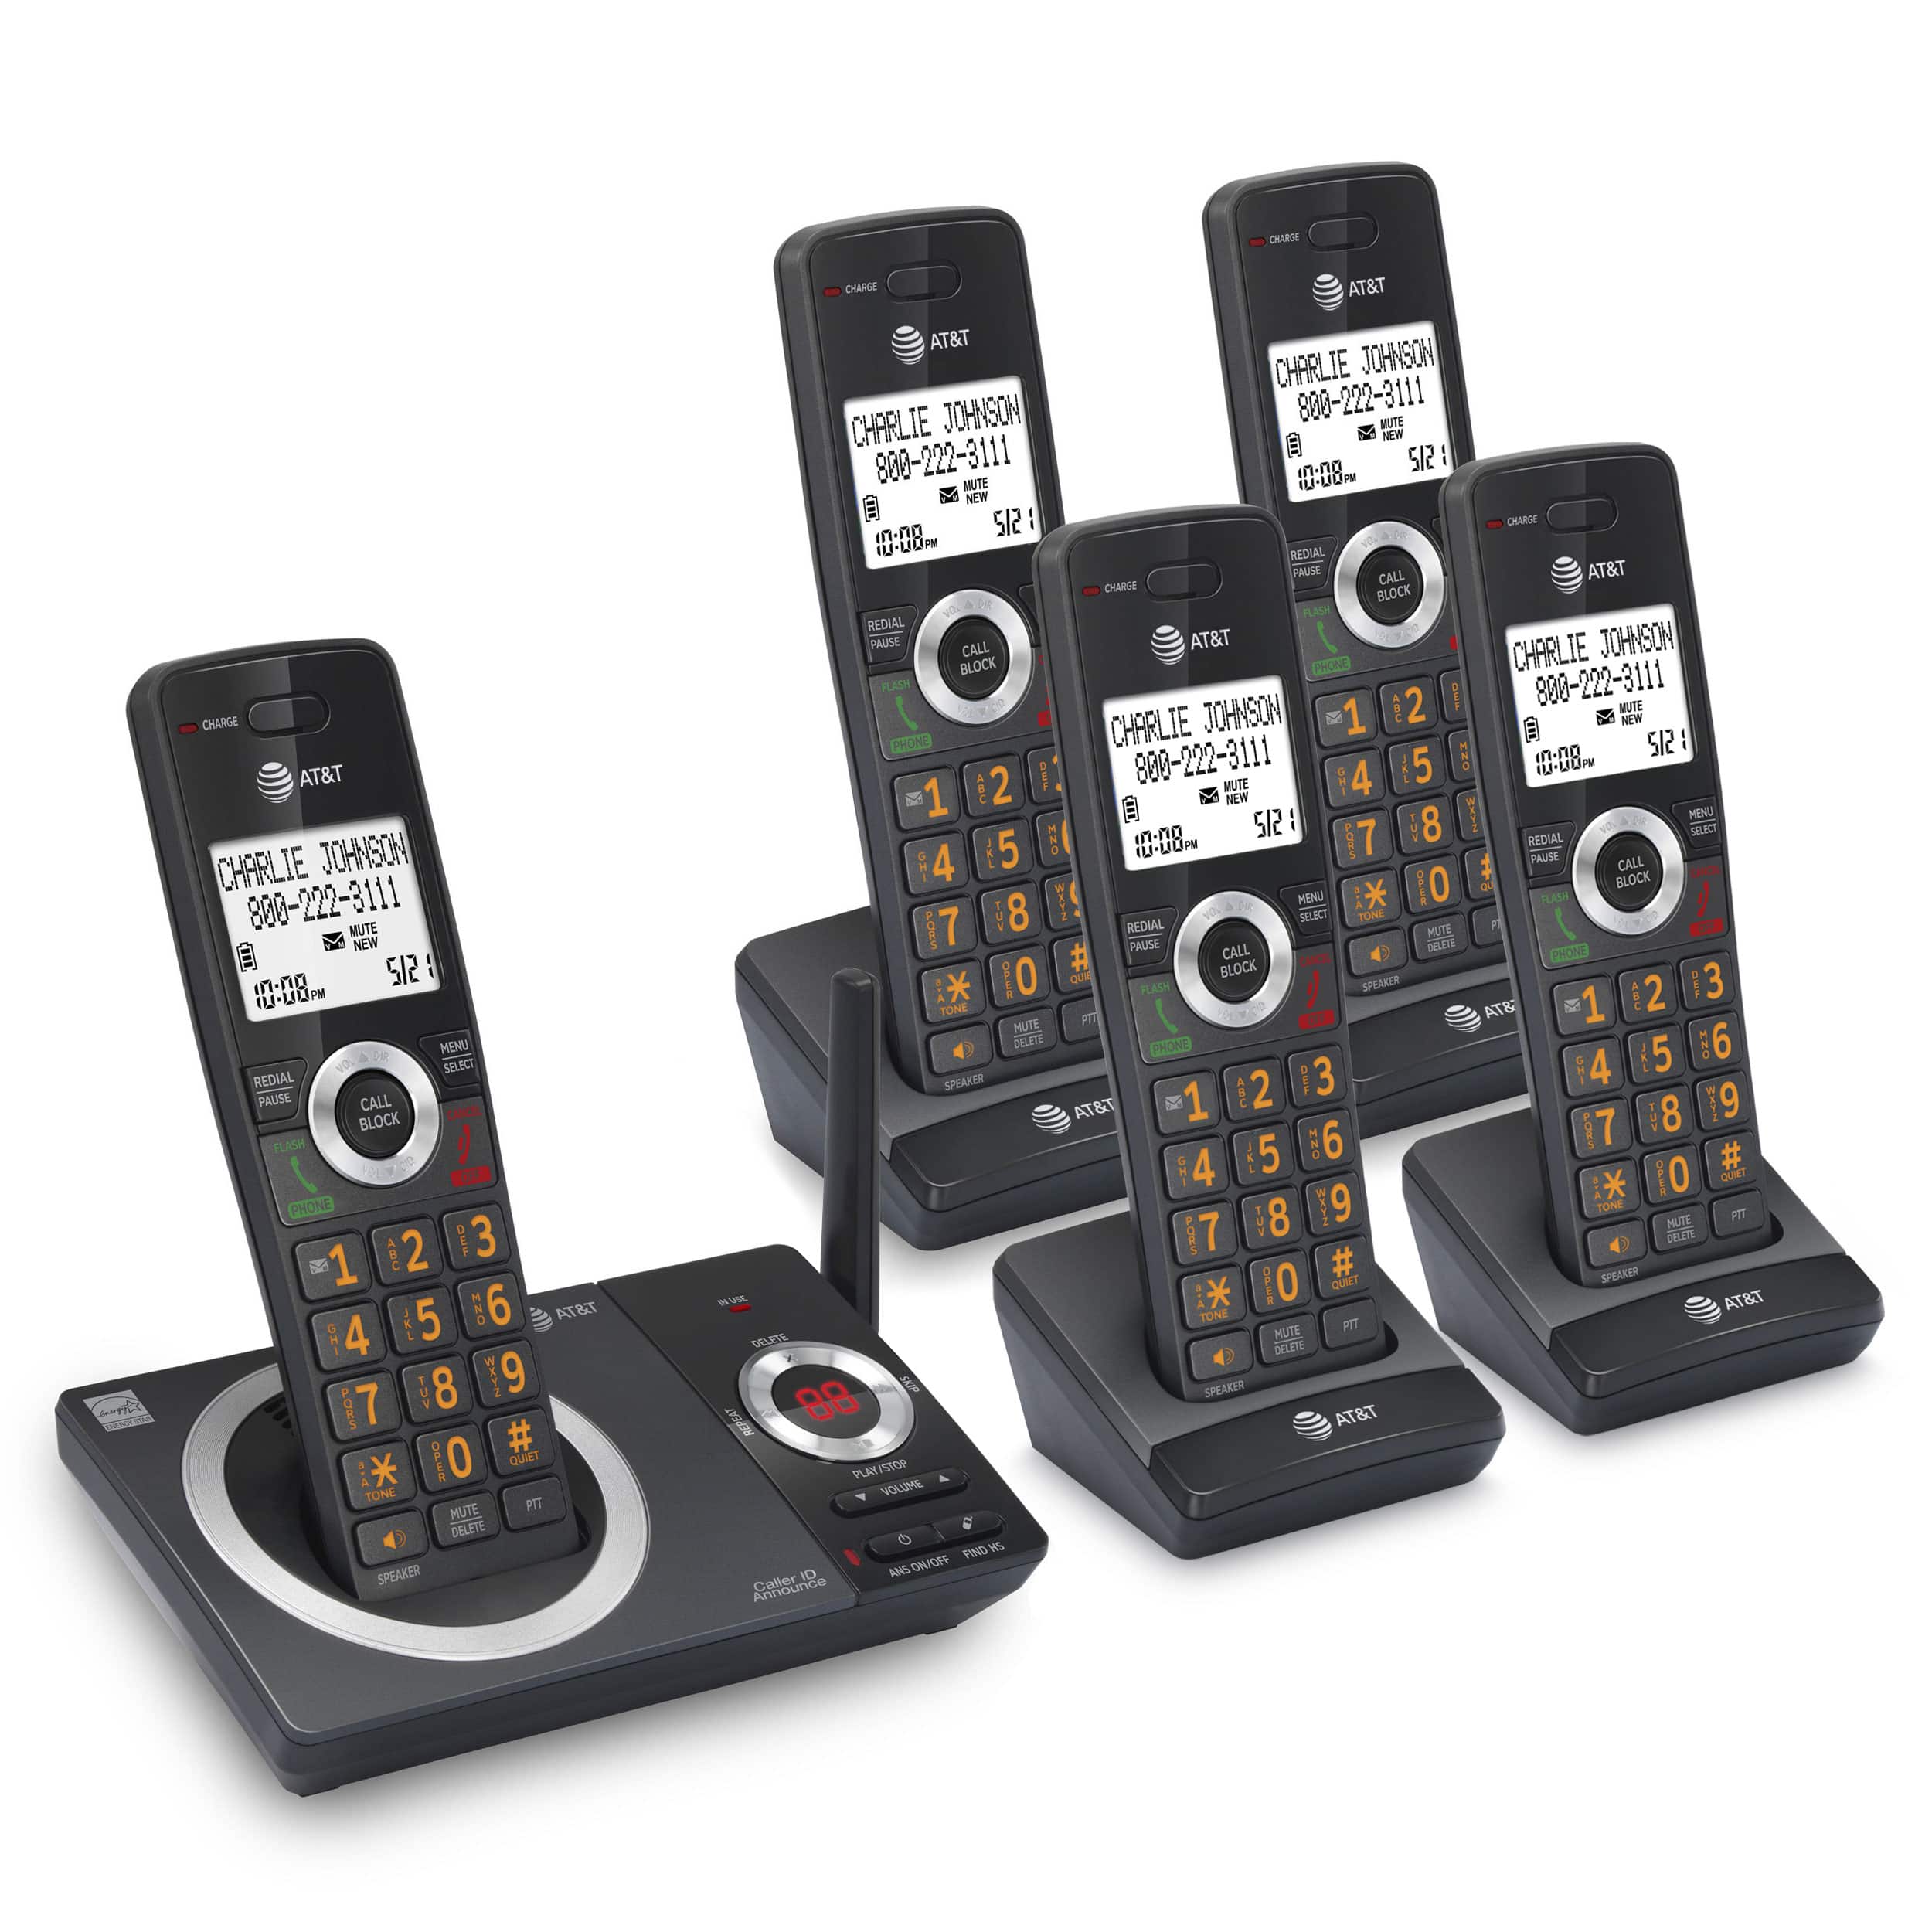 5-Handset Expandable Cordless Phone with Unsurpassed Range, Smart Call Blocker and Answering System - view 3